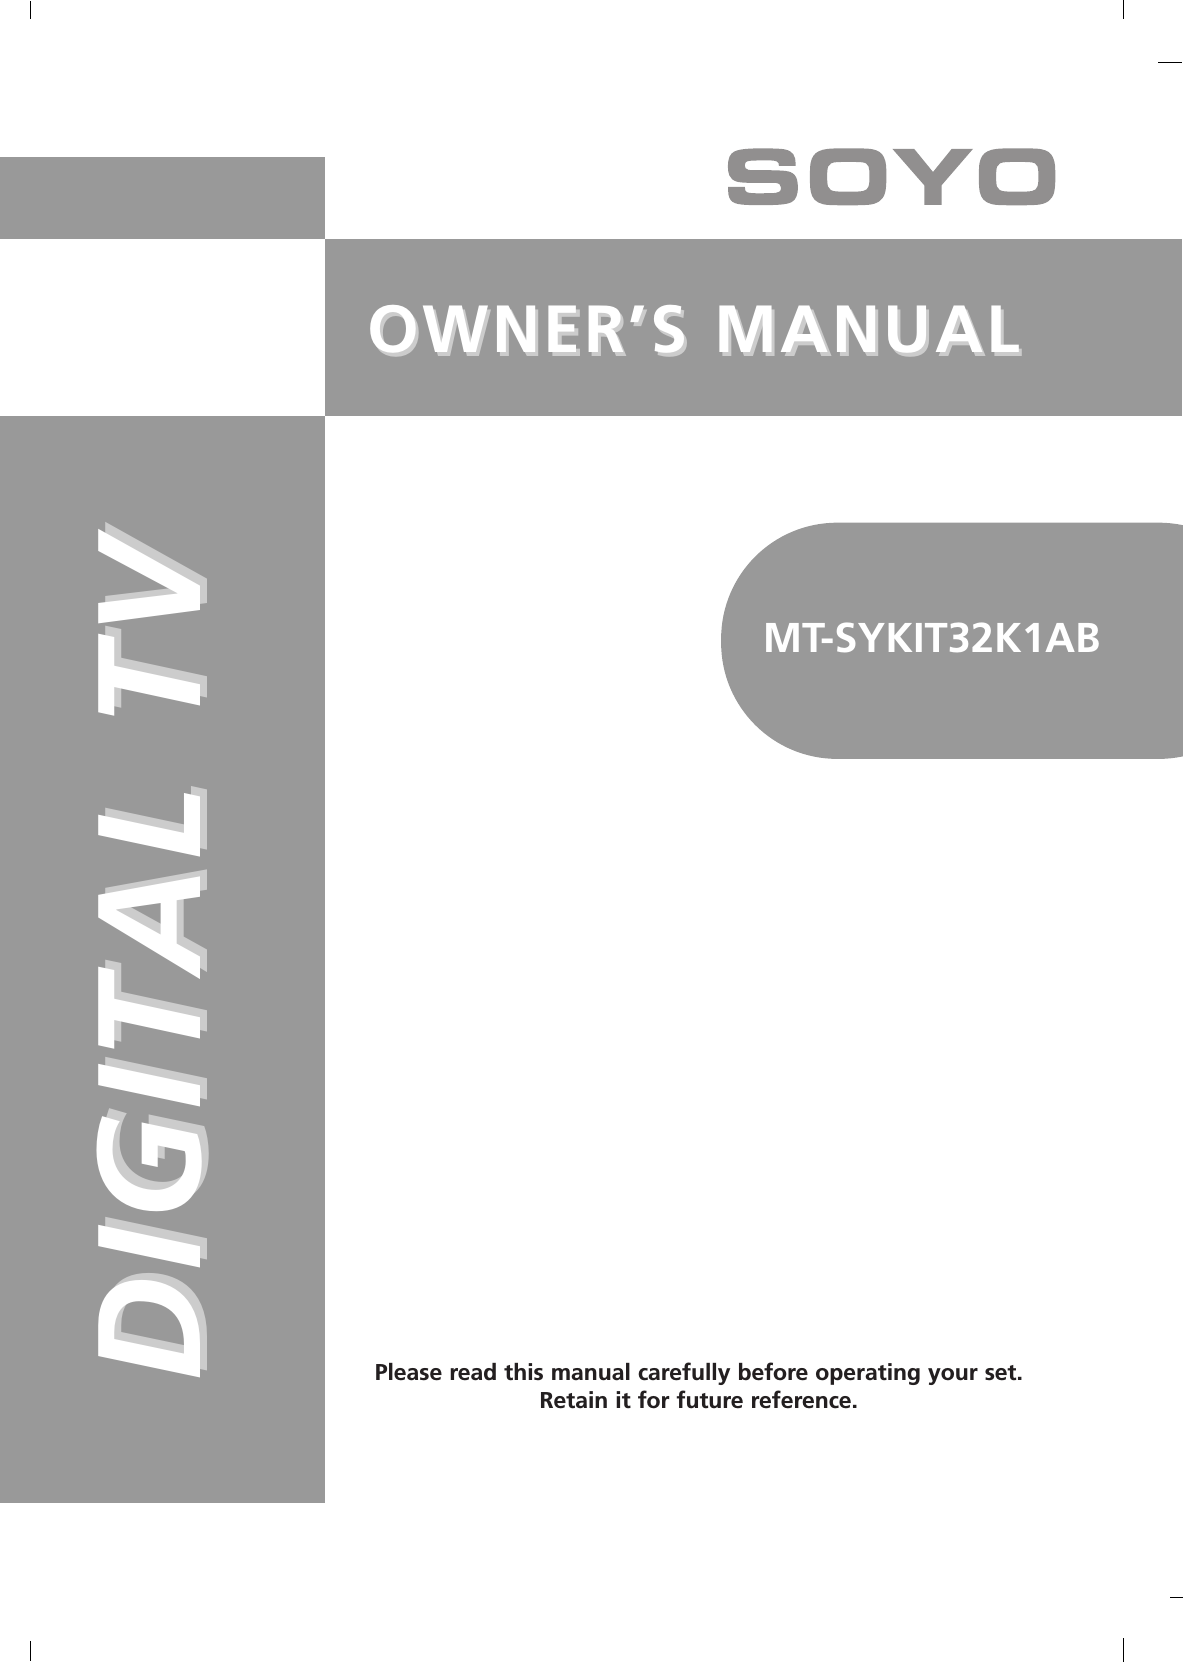 OWNER’S MANUALOWNER’S MANUALDIGITAL TVDIGITAL TVPlease read this manual carefully before operating your set.Retain it for future reference.MT-SYKIT32K1AB